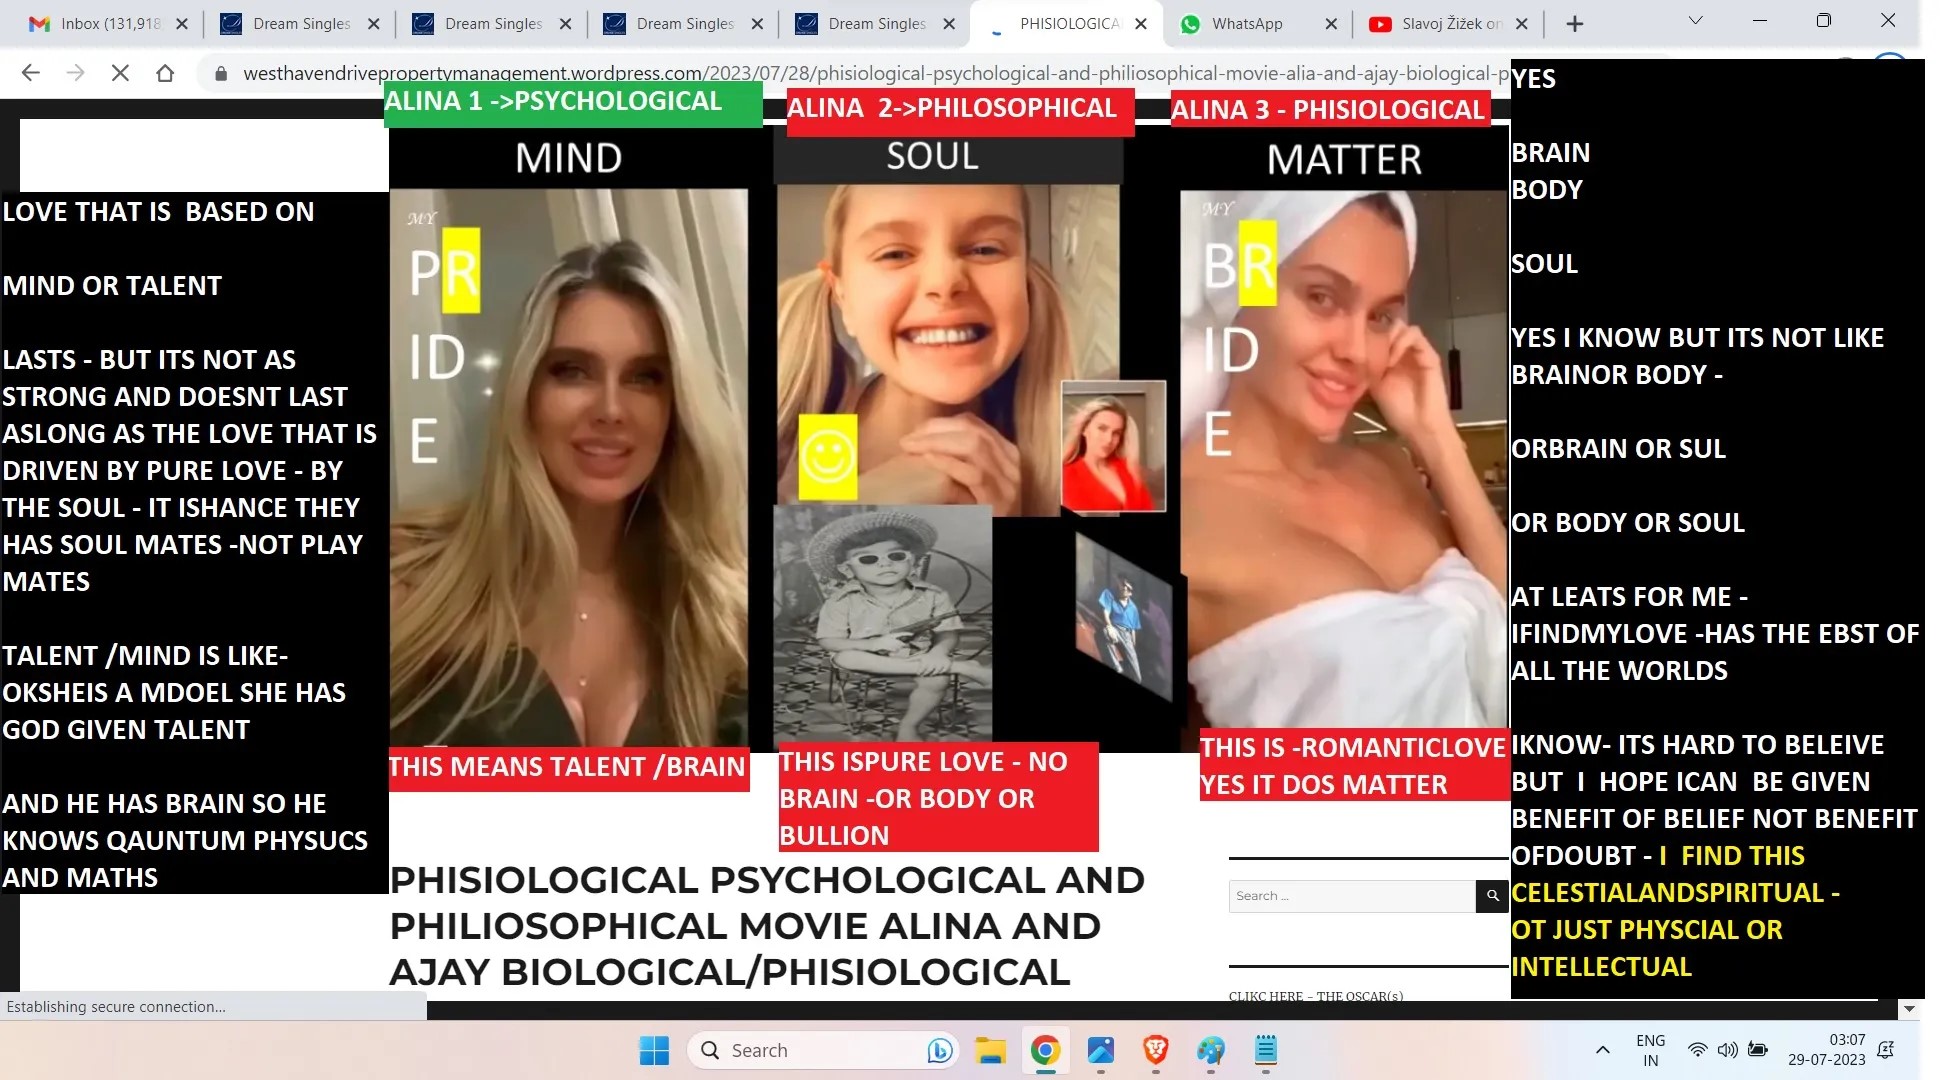 ALINA-MATSENKO-AJAY-MISHAR-LOVE-STORY PSYCHOLOGY PHOLOSOPHY PHYSIOLOGY -SOUL IS RED - MIND ID GREEN -AND - MATETR ISWHITE -